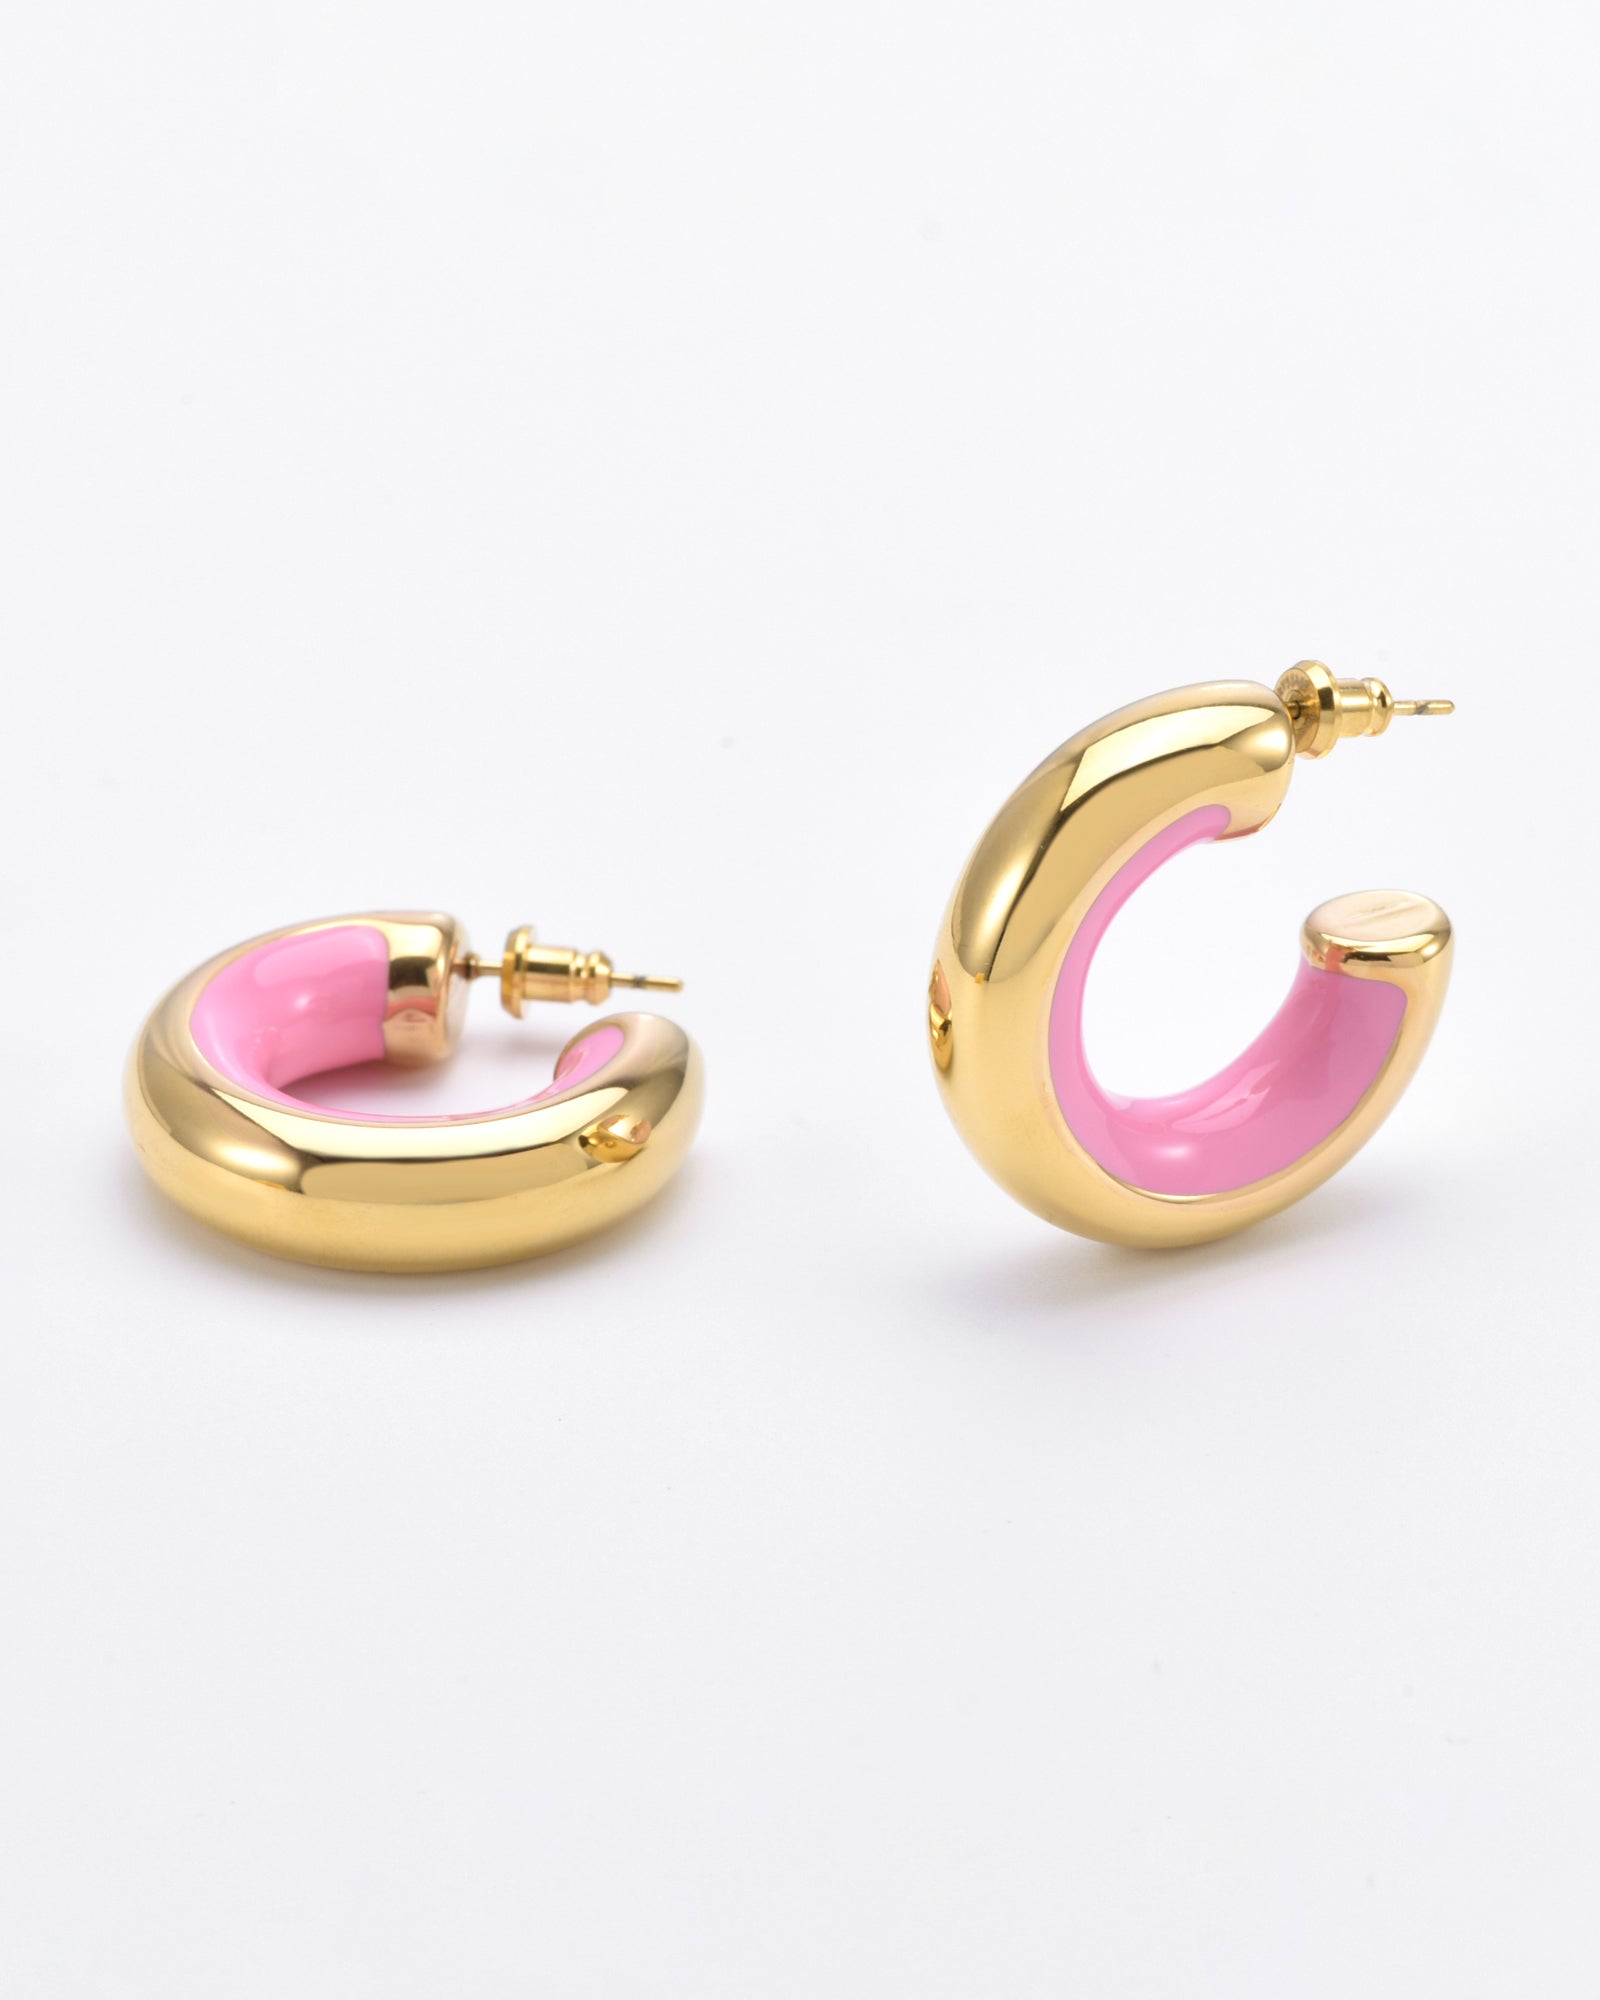 A pair of 24-karat gold-plated hoop earrings with a thick, rounded design. The exterior is gold, while the interior features shiny pink hand-painted enamel. The Lotus Earrings Pink by For Art&#39;s Sake® have post and clasp closures and are positioned on a plain white background.